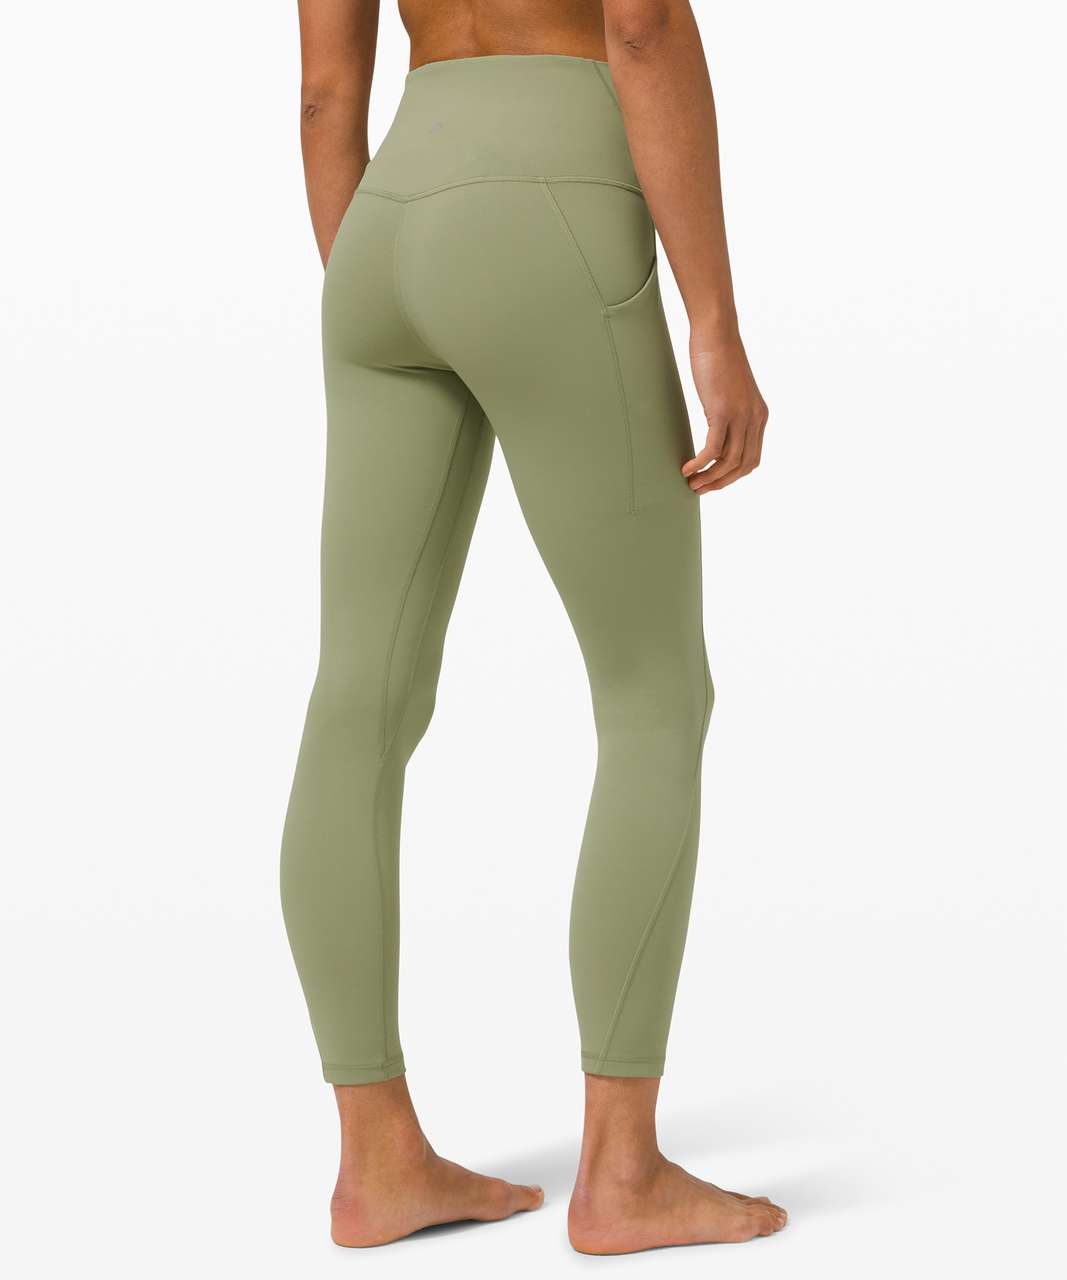 Lululemon Align High Rise Pant with Pockets 25" - Rosemary Green